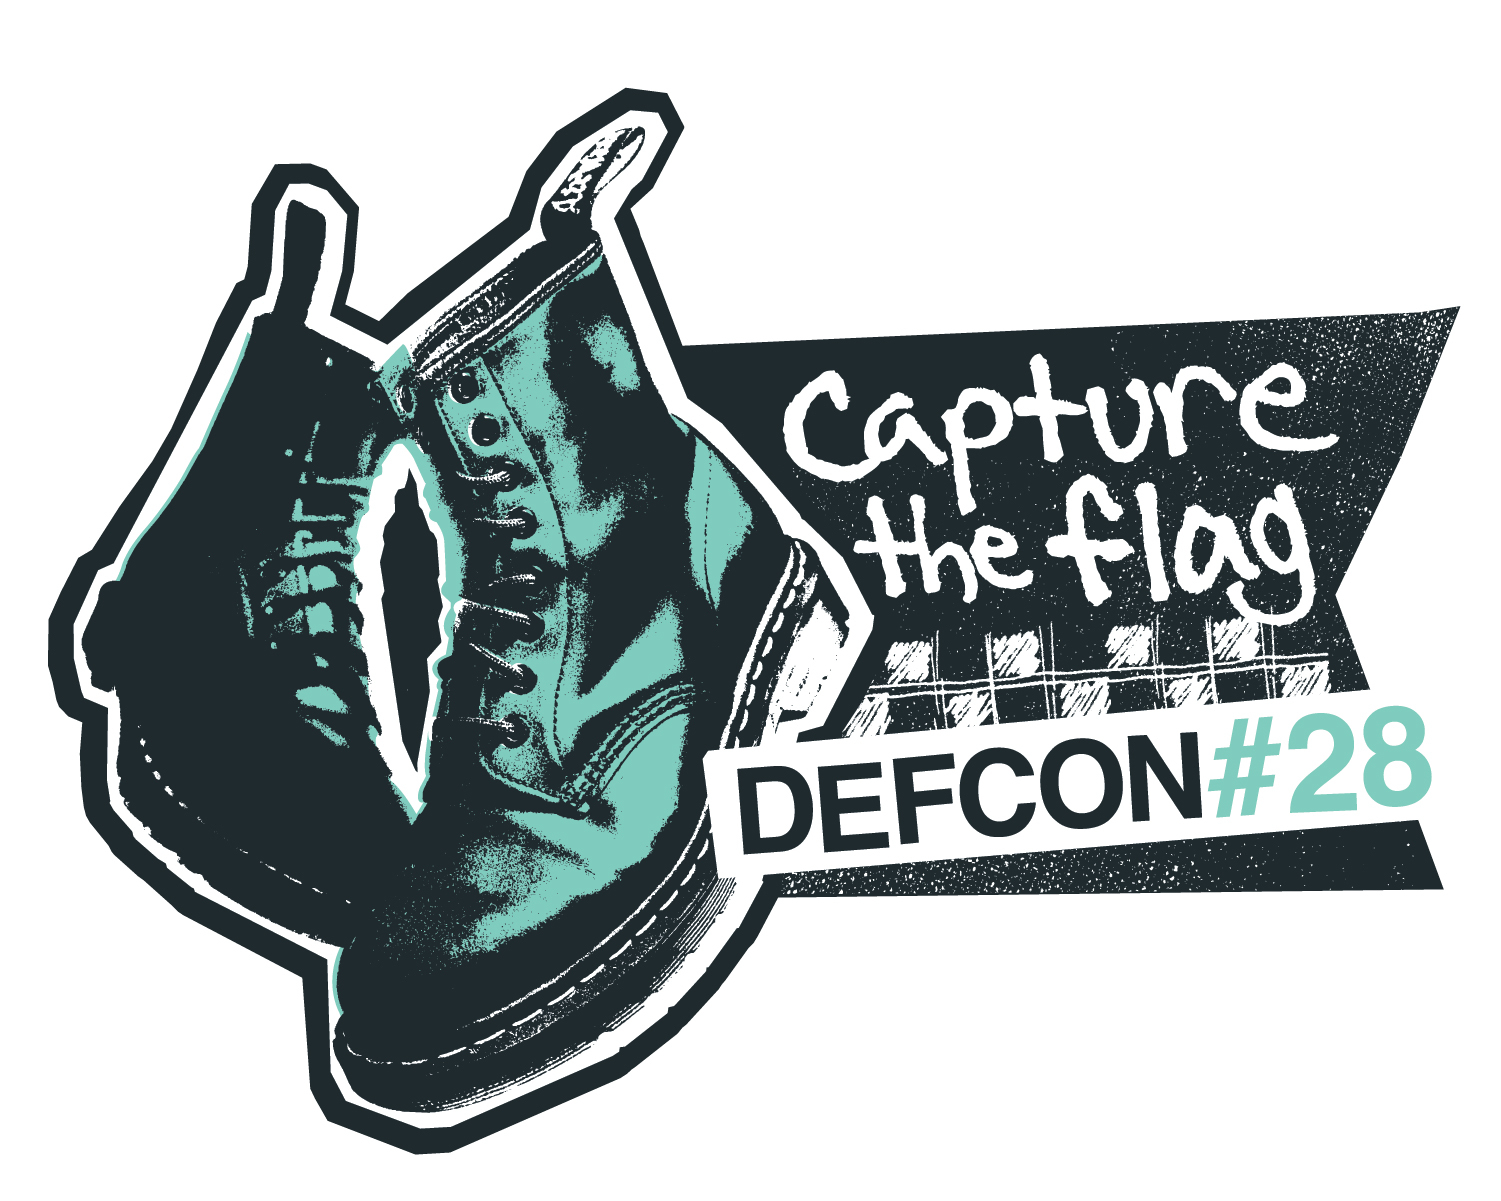 DEF CON 28 Logo, pair of boots, capture the flag text in black, white and teal